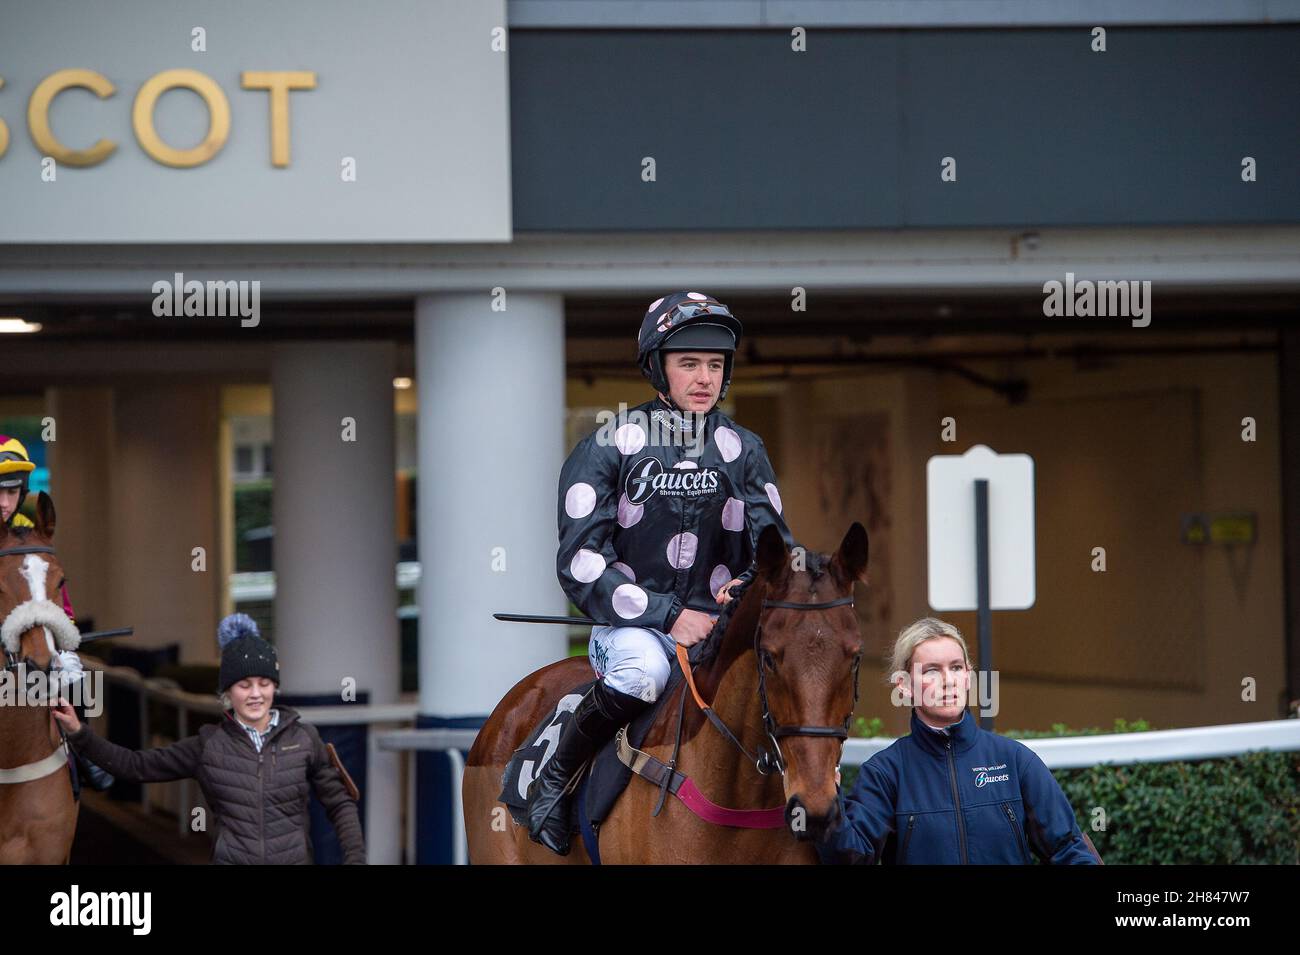 Ascot, Berkshire, UK. 19th November, 2021. Jockey Jonjo O'Neill Jr on horse Yes Indeed before racing in the Events at Ascot Handicap Steeple Chase. Credit: Maureen McLean/Alamy Stock Photo